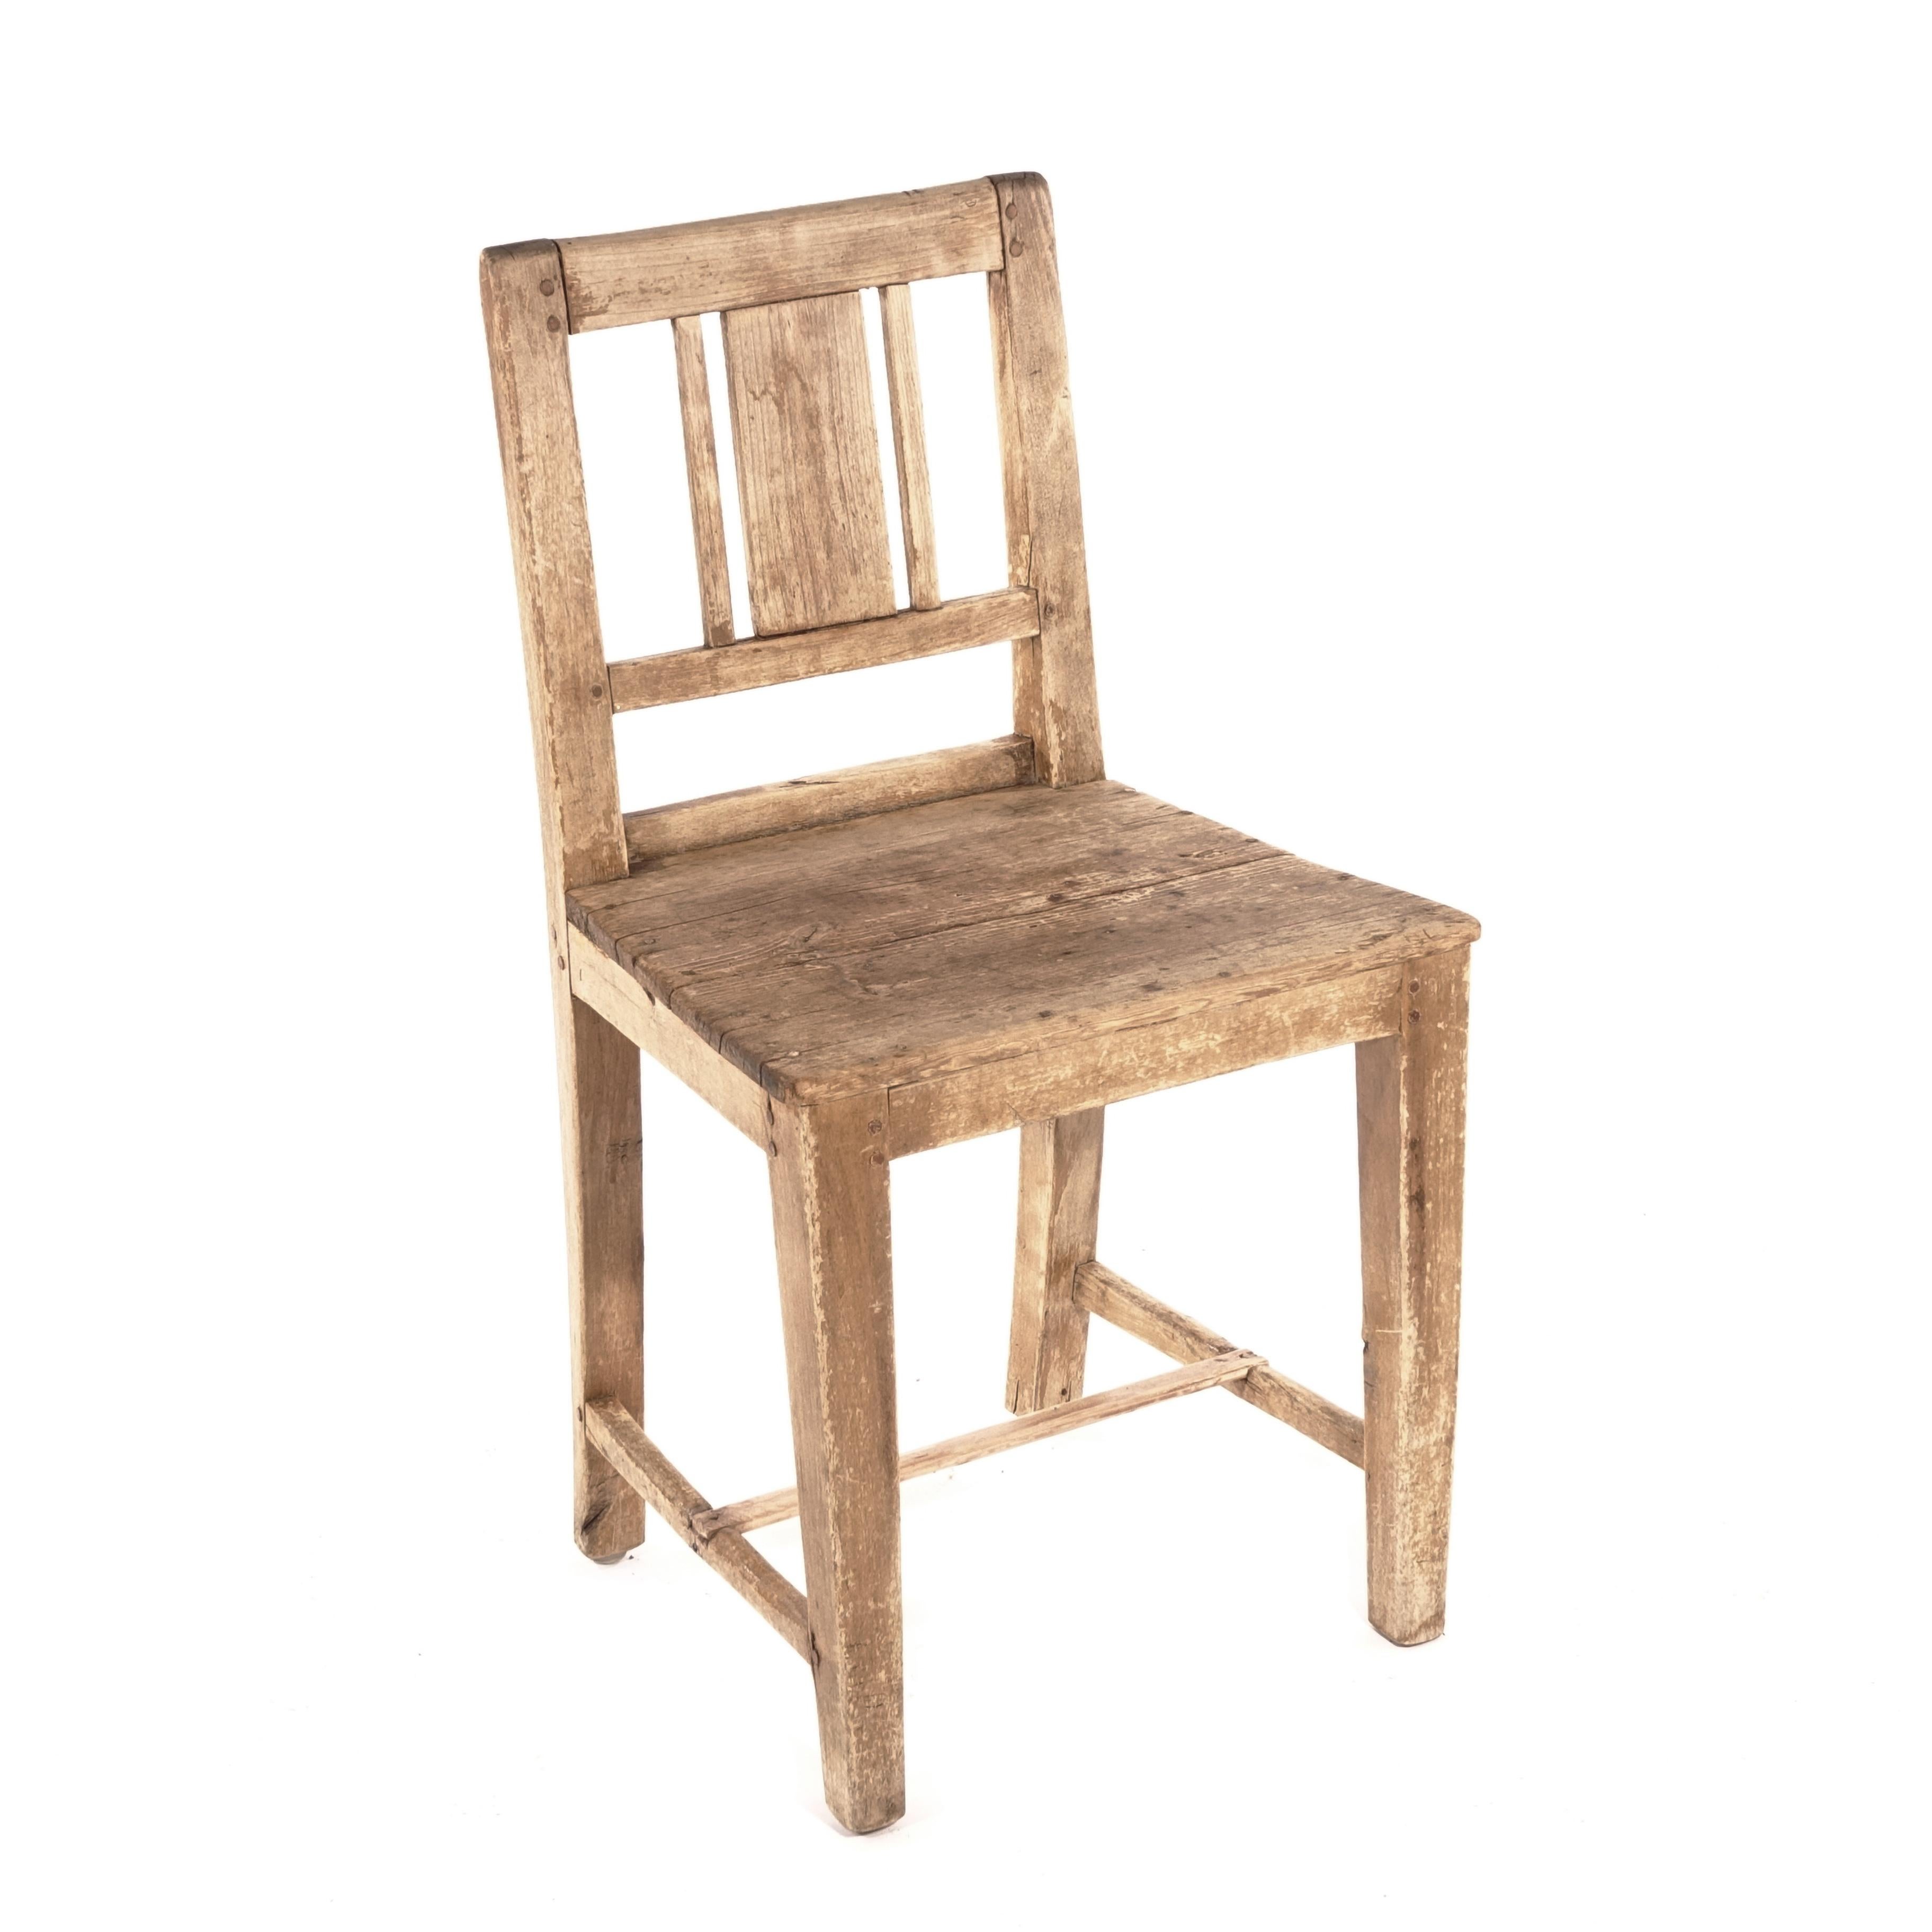 Swedish Karl Johan Chair in Pine from Late 1800s For Sale 2